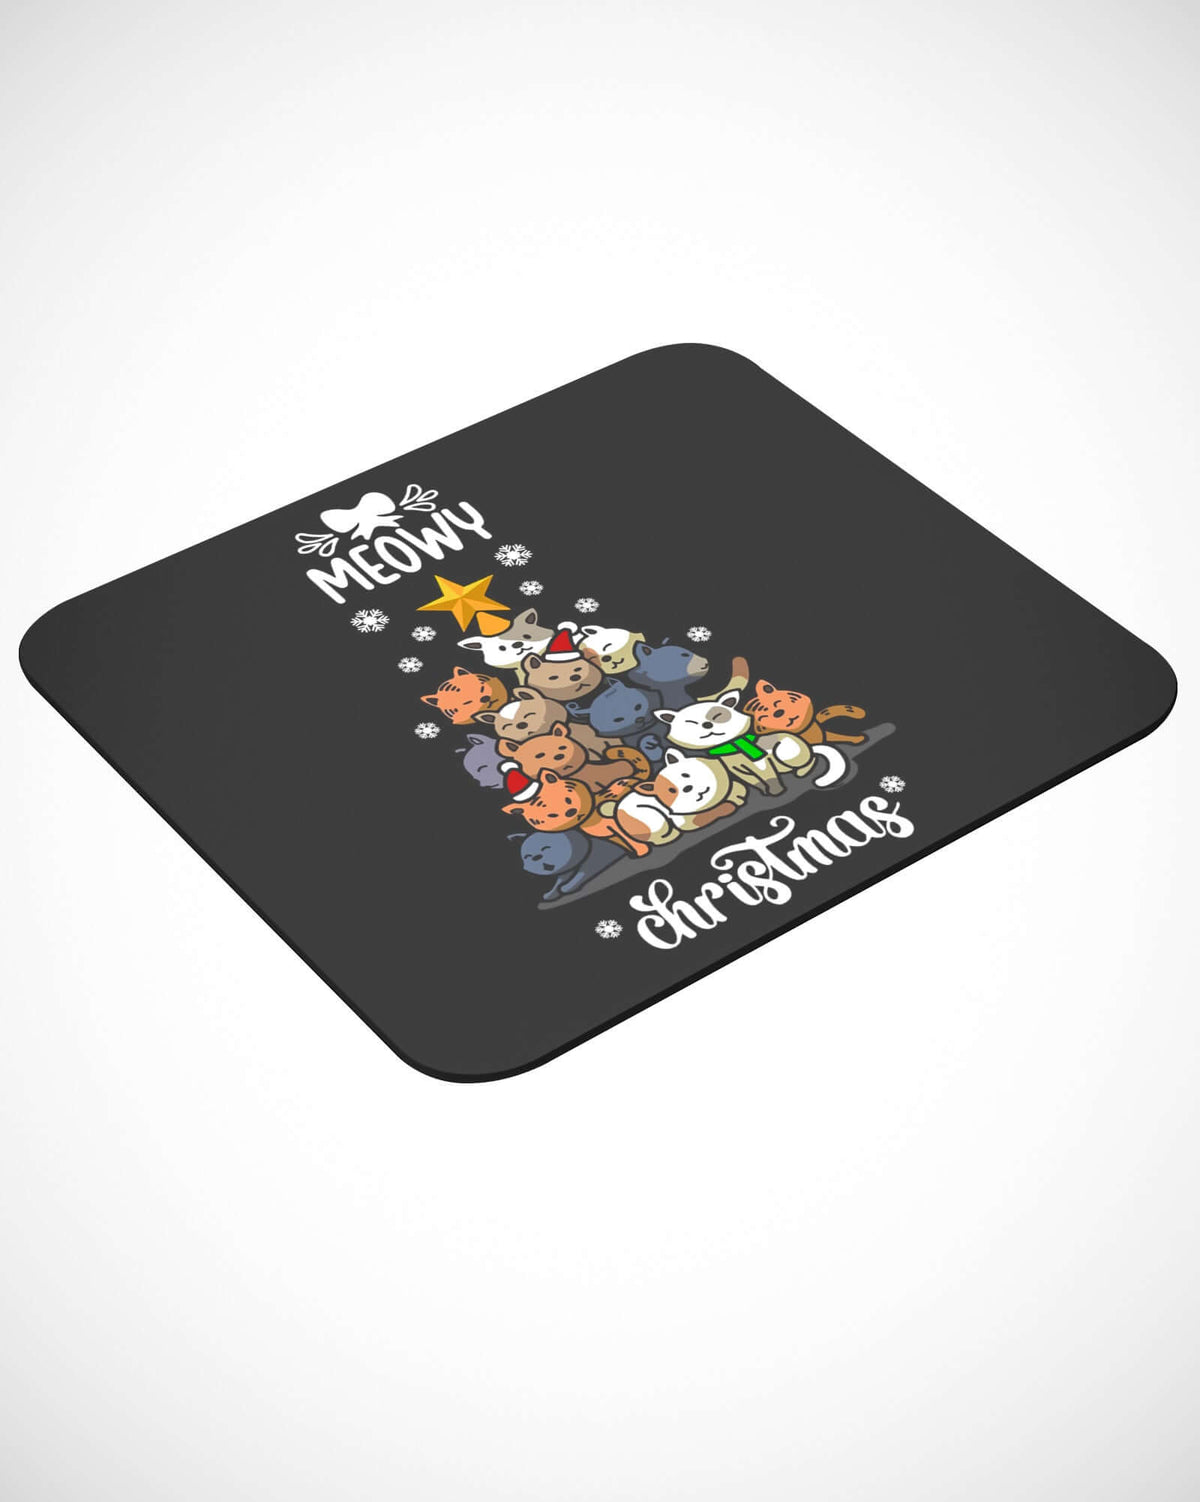 Meowy Christmas Mouse pad - ApparelinClick